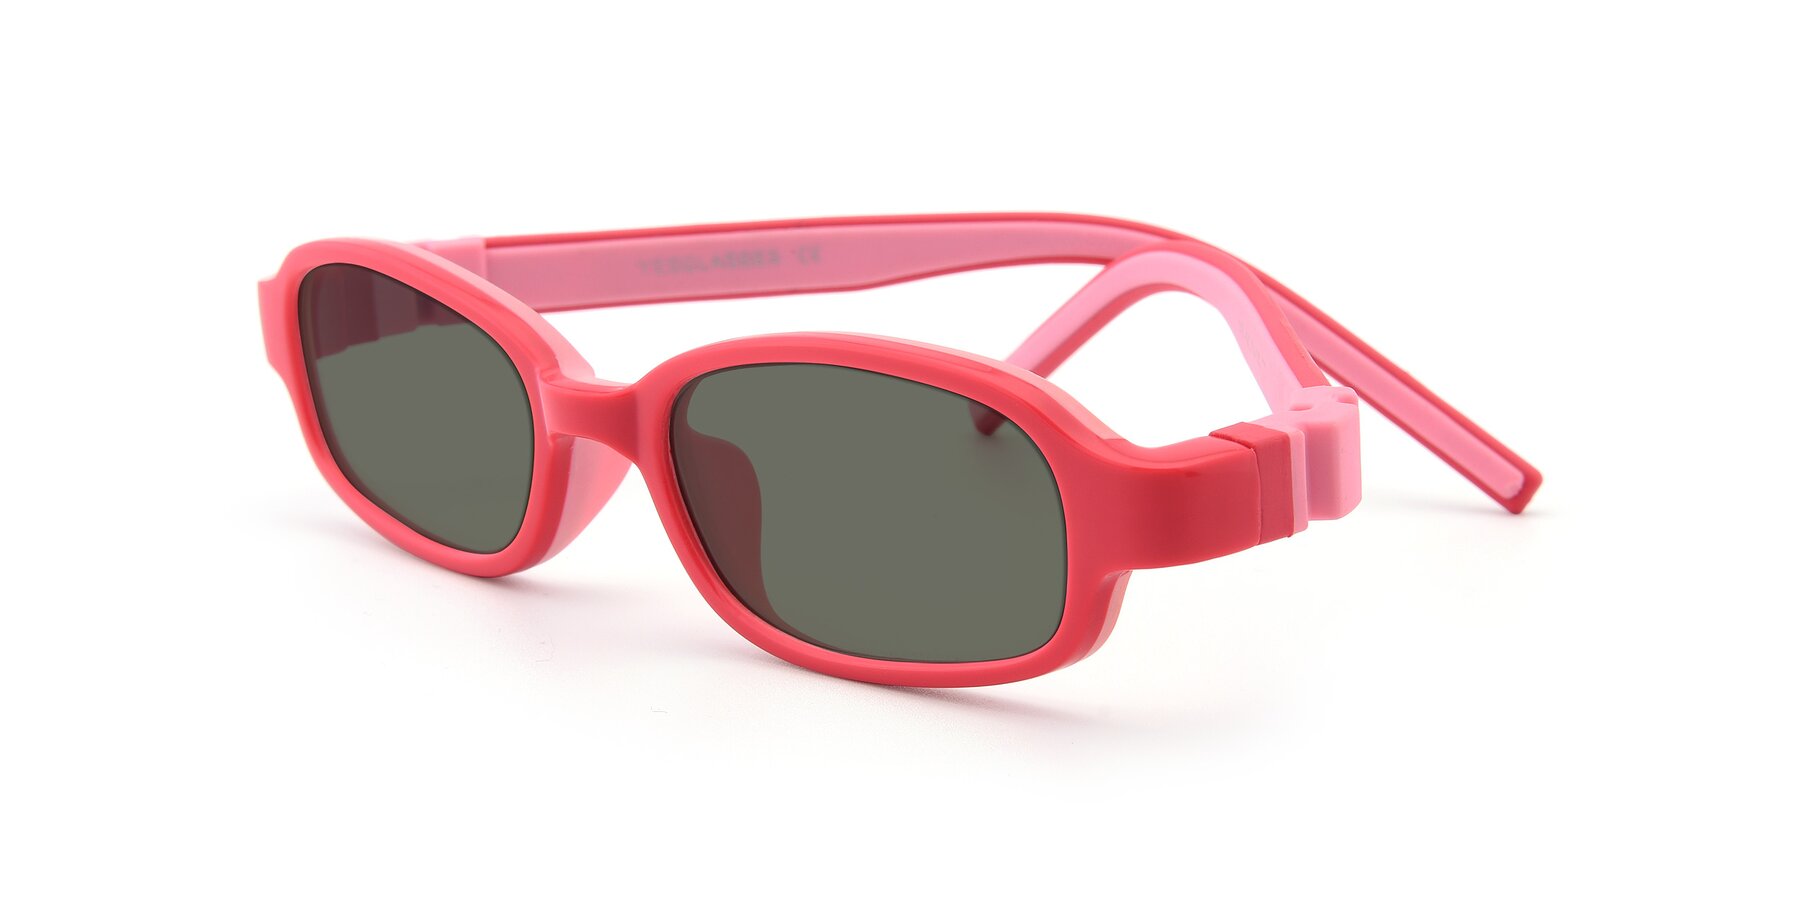 Angle of 515 in Red-Pink with Gray Polarized Lenses